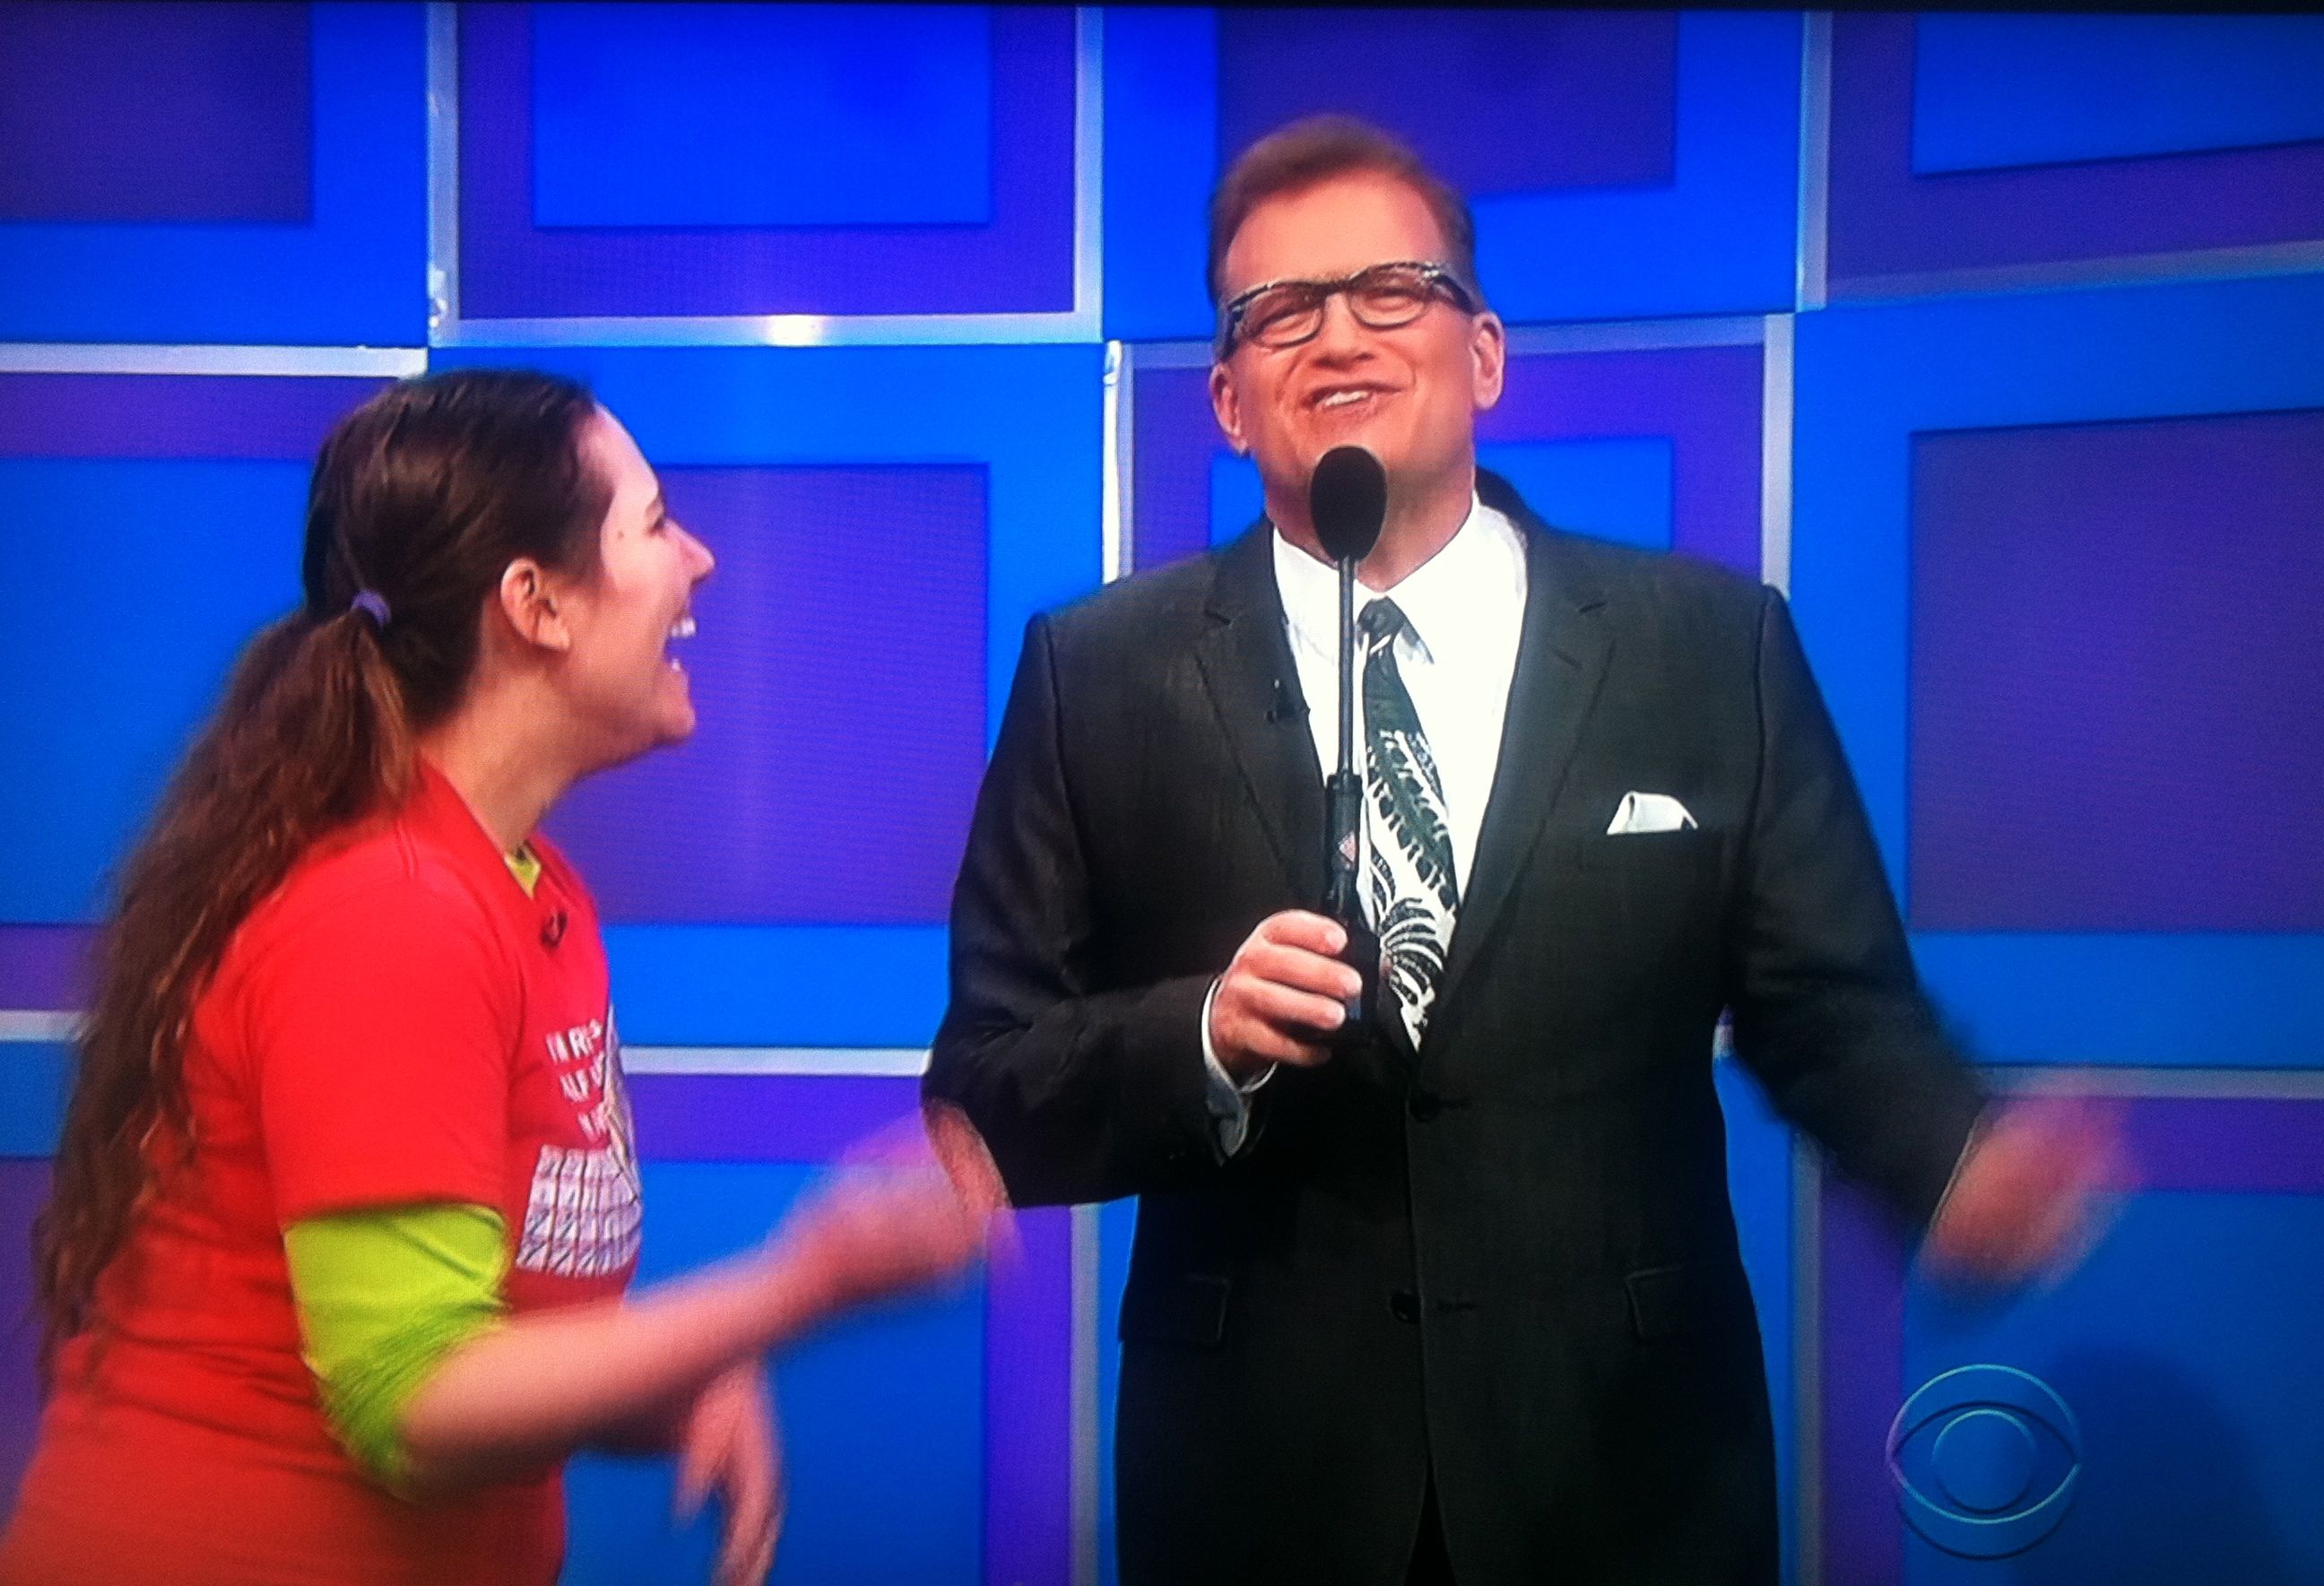 Drew Carey lightly making fun of Aurora De Lucia on The Price is Right - and her loving every second of it